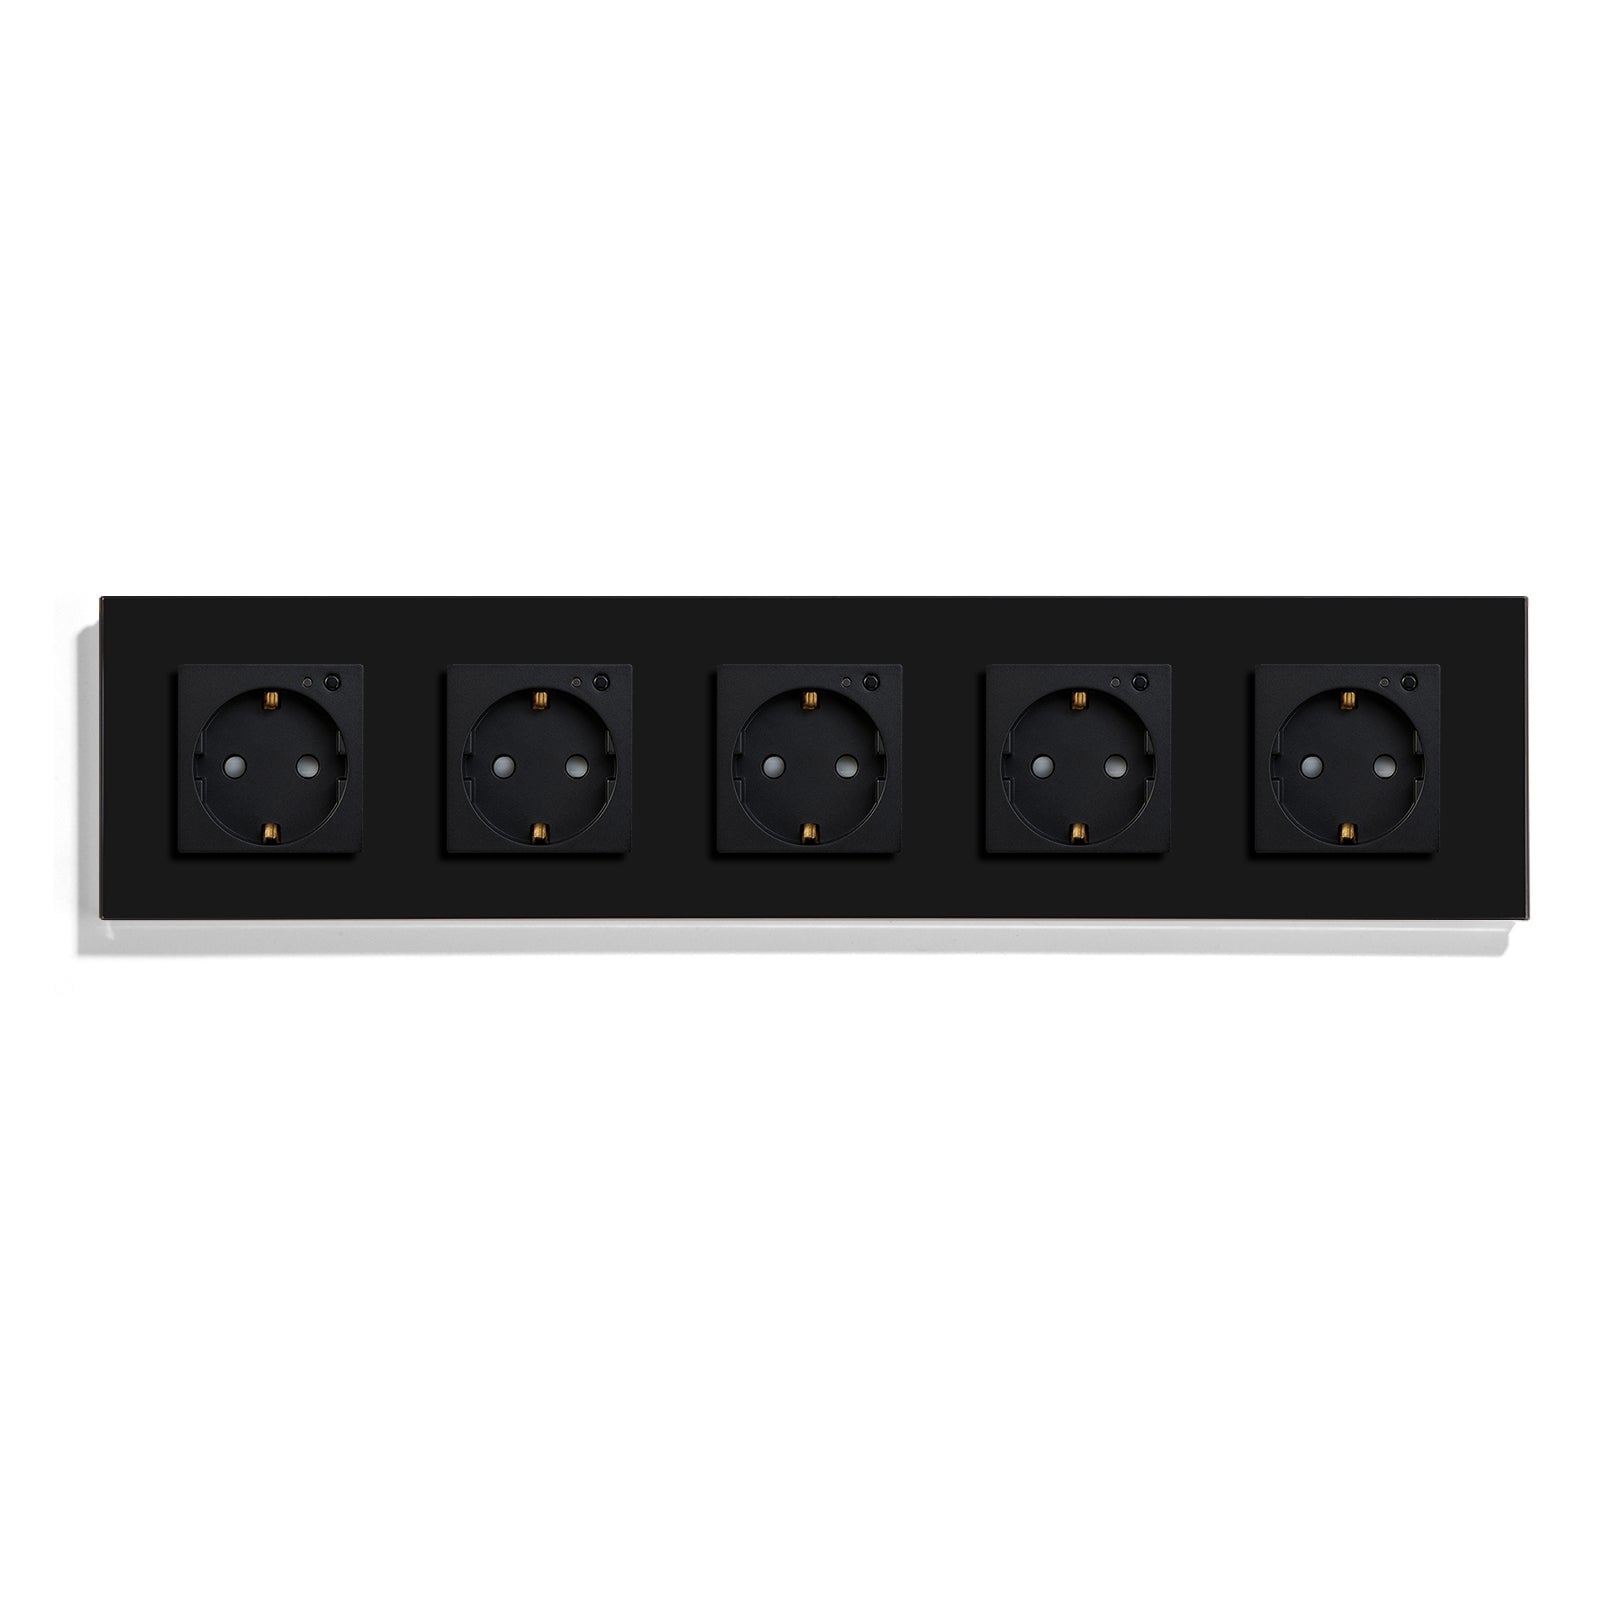 BSEED ZigBee EU Wall Sockets Power Outlets Kids Protection Wall Plates & Covers Bseedswitch black Quintuple 